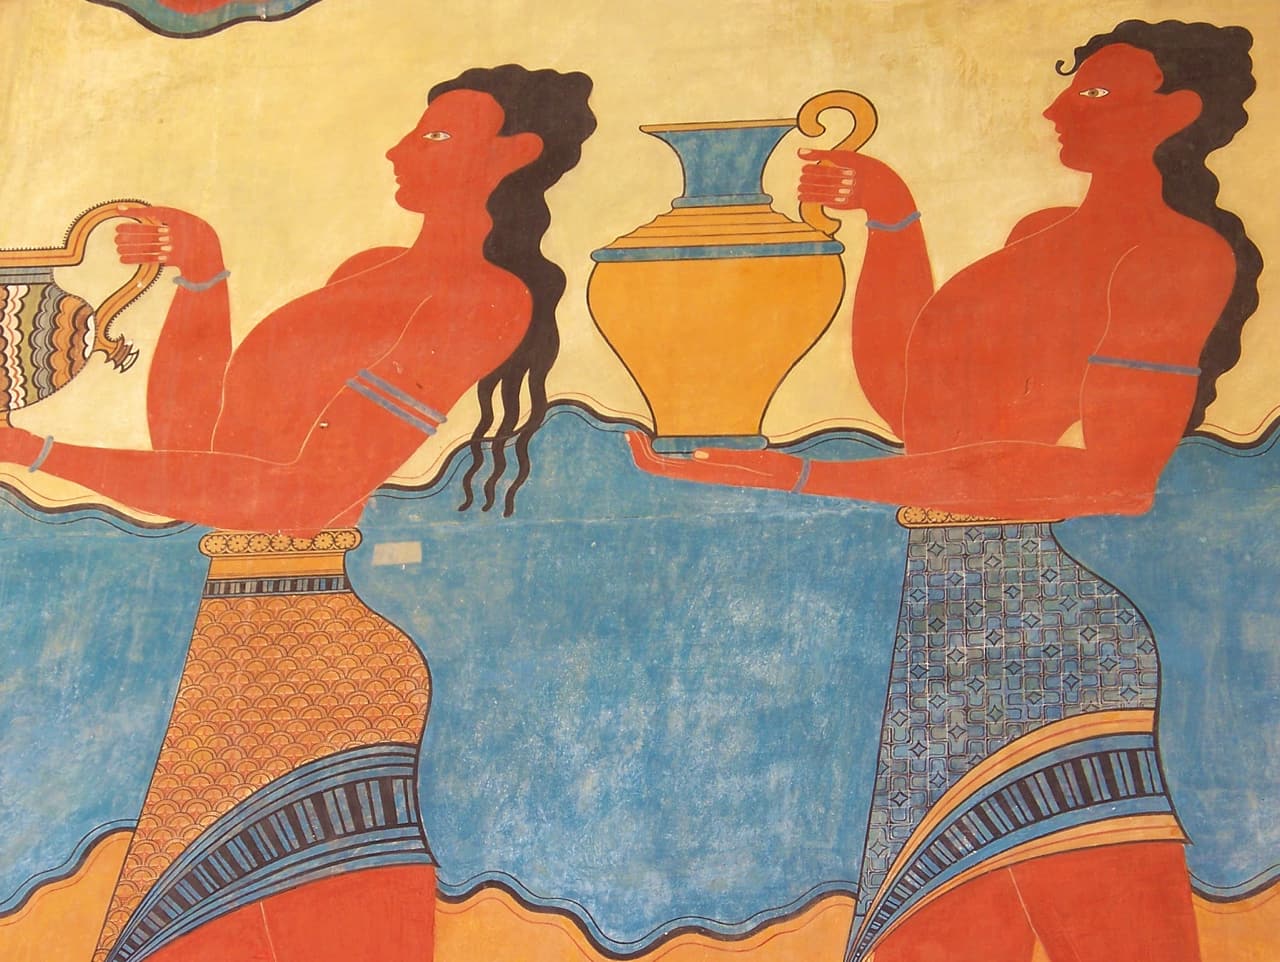 Knossos, the Capital of Minoan Civilization Still Has More Treasures to Reveal